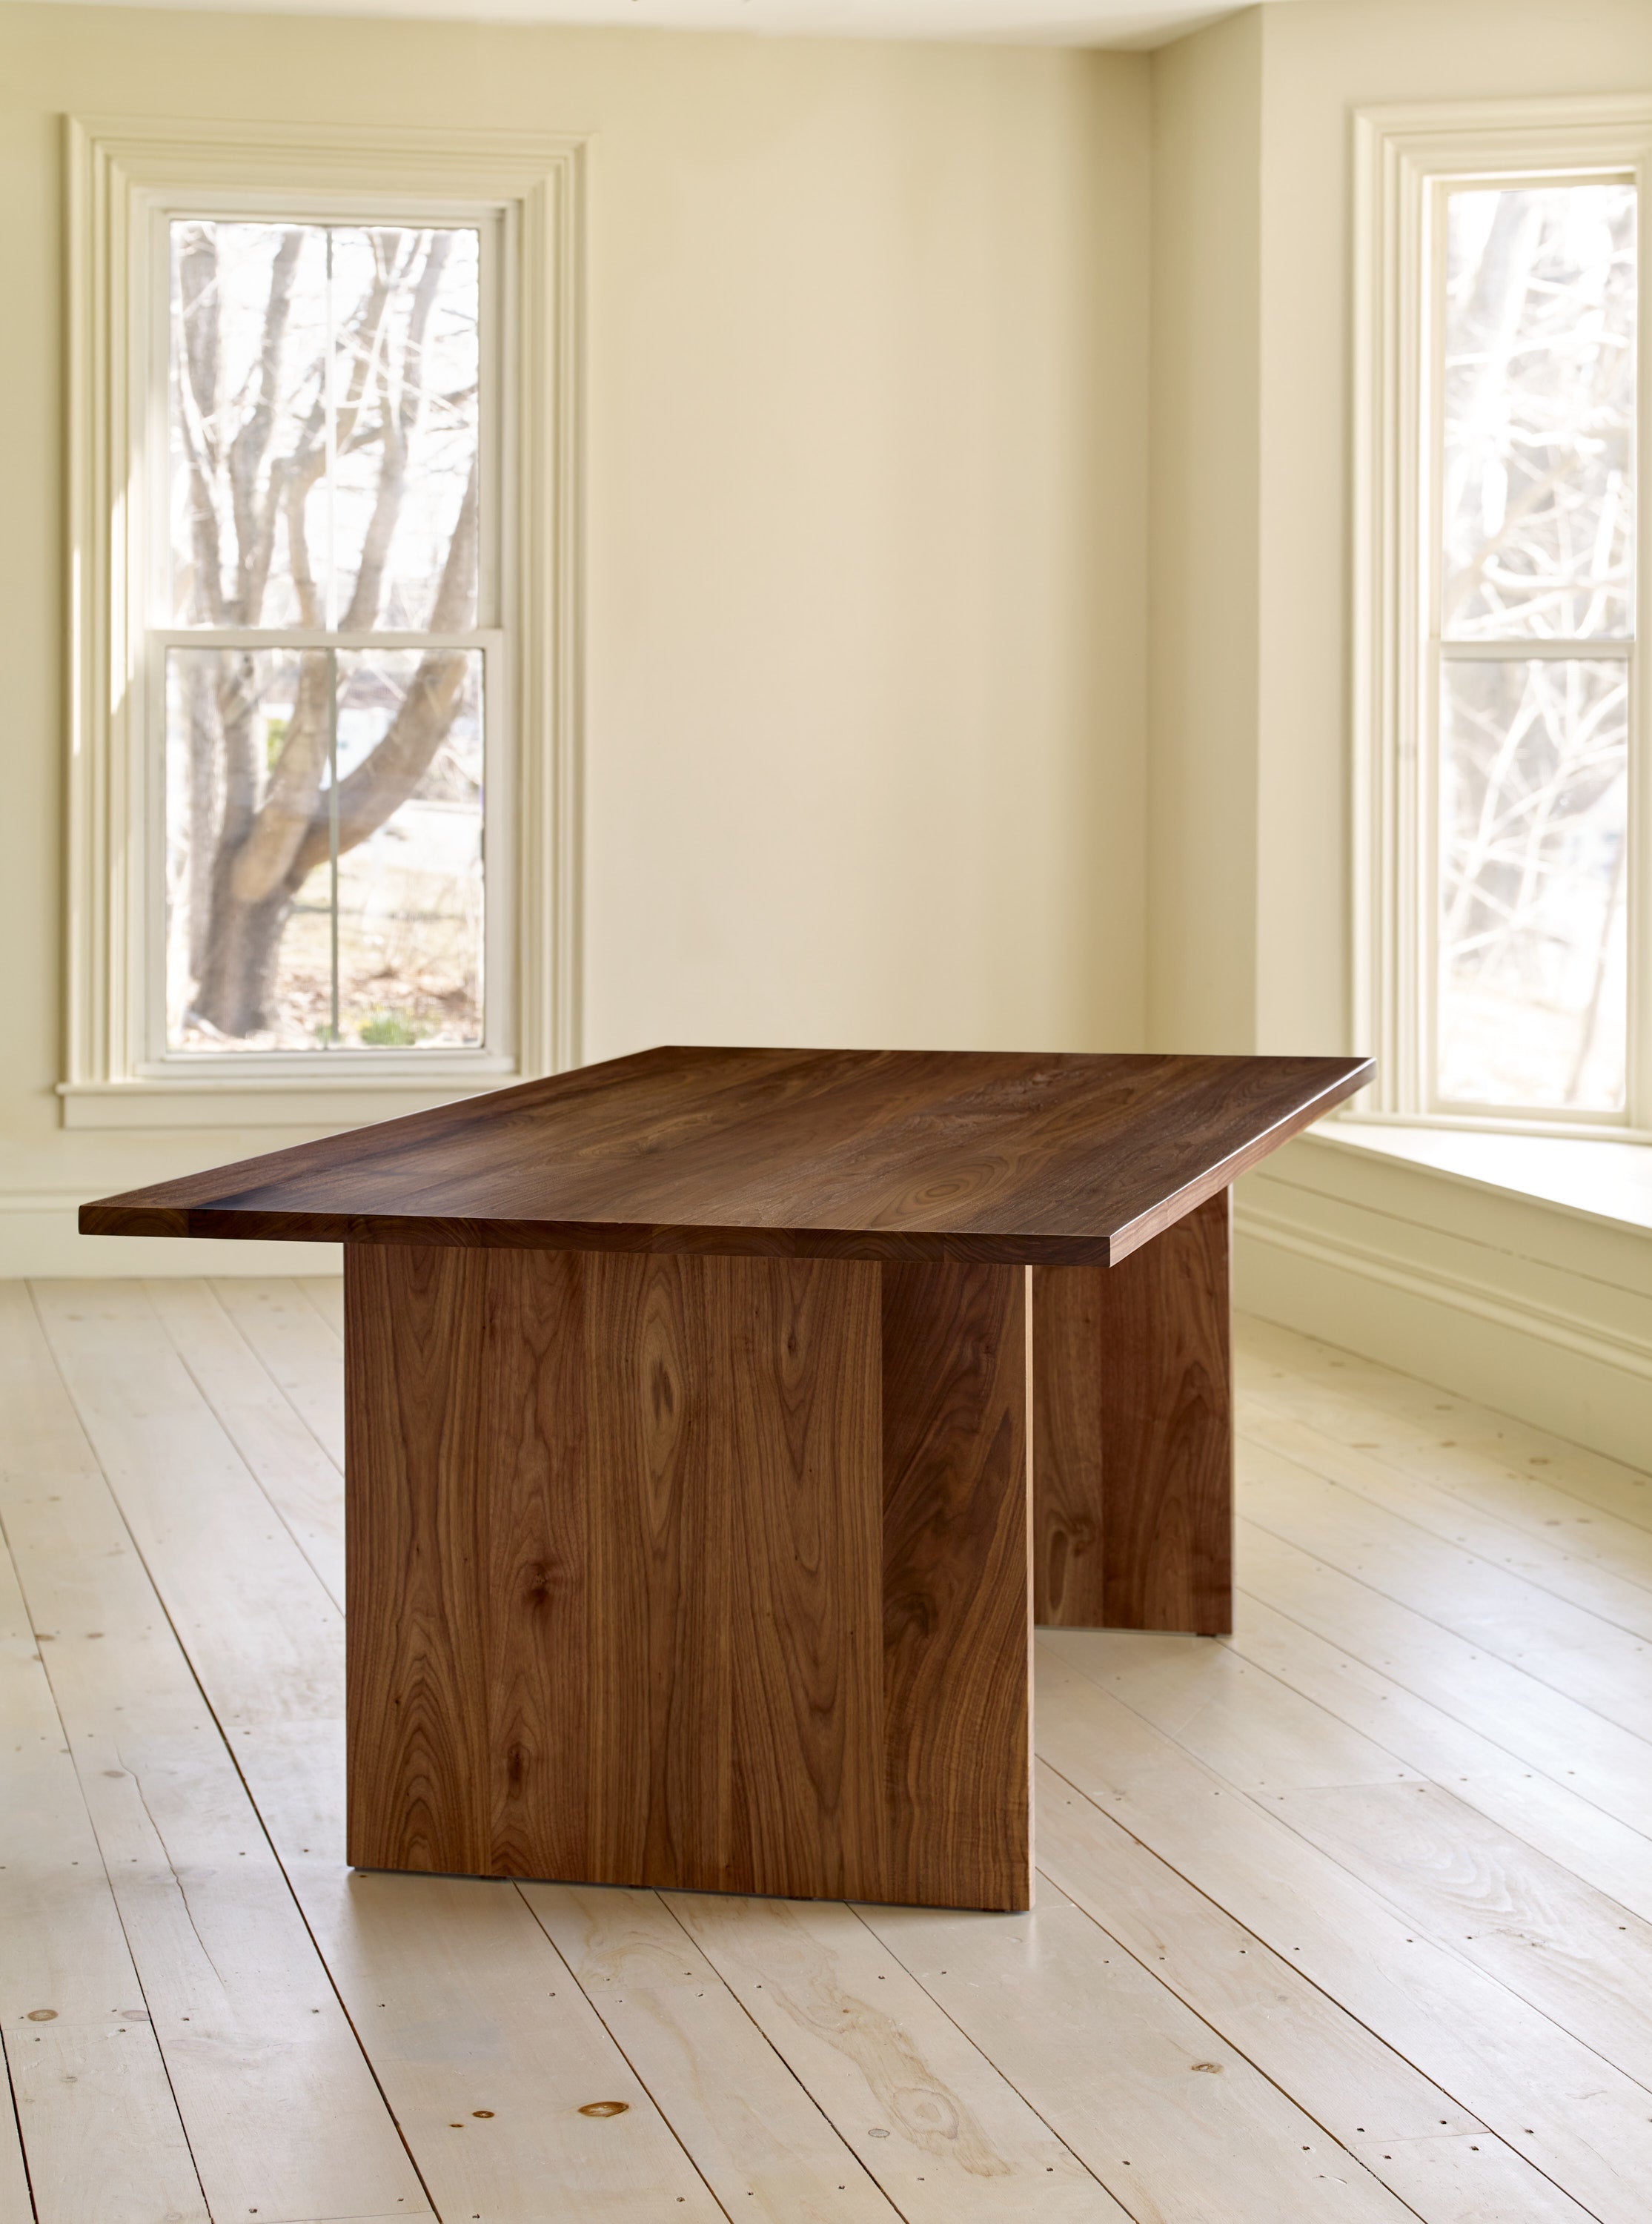 Walnut trestle style Hygge Dining Table in bright window lit room on wood pine floors